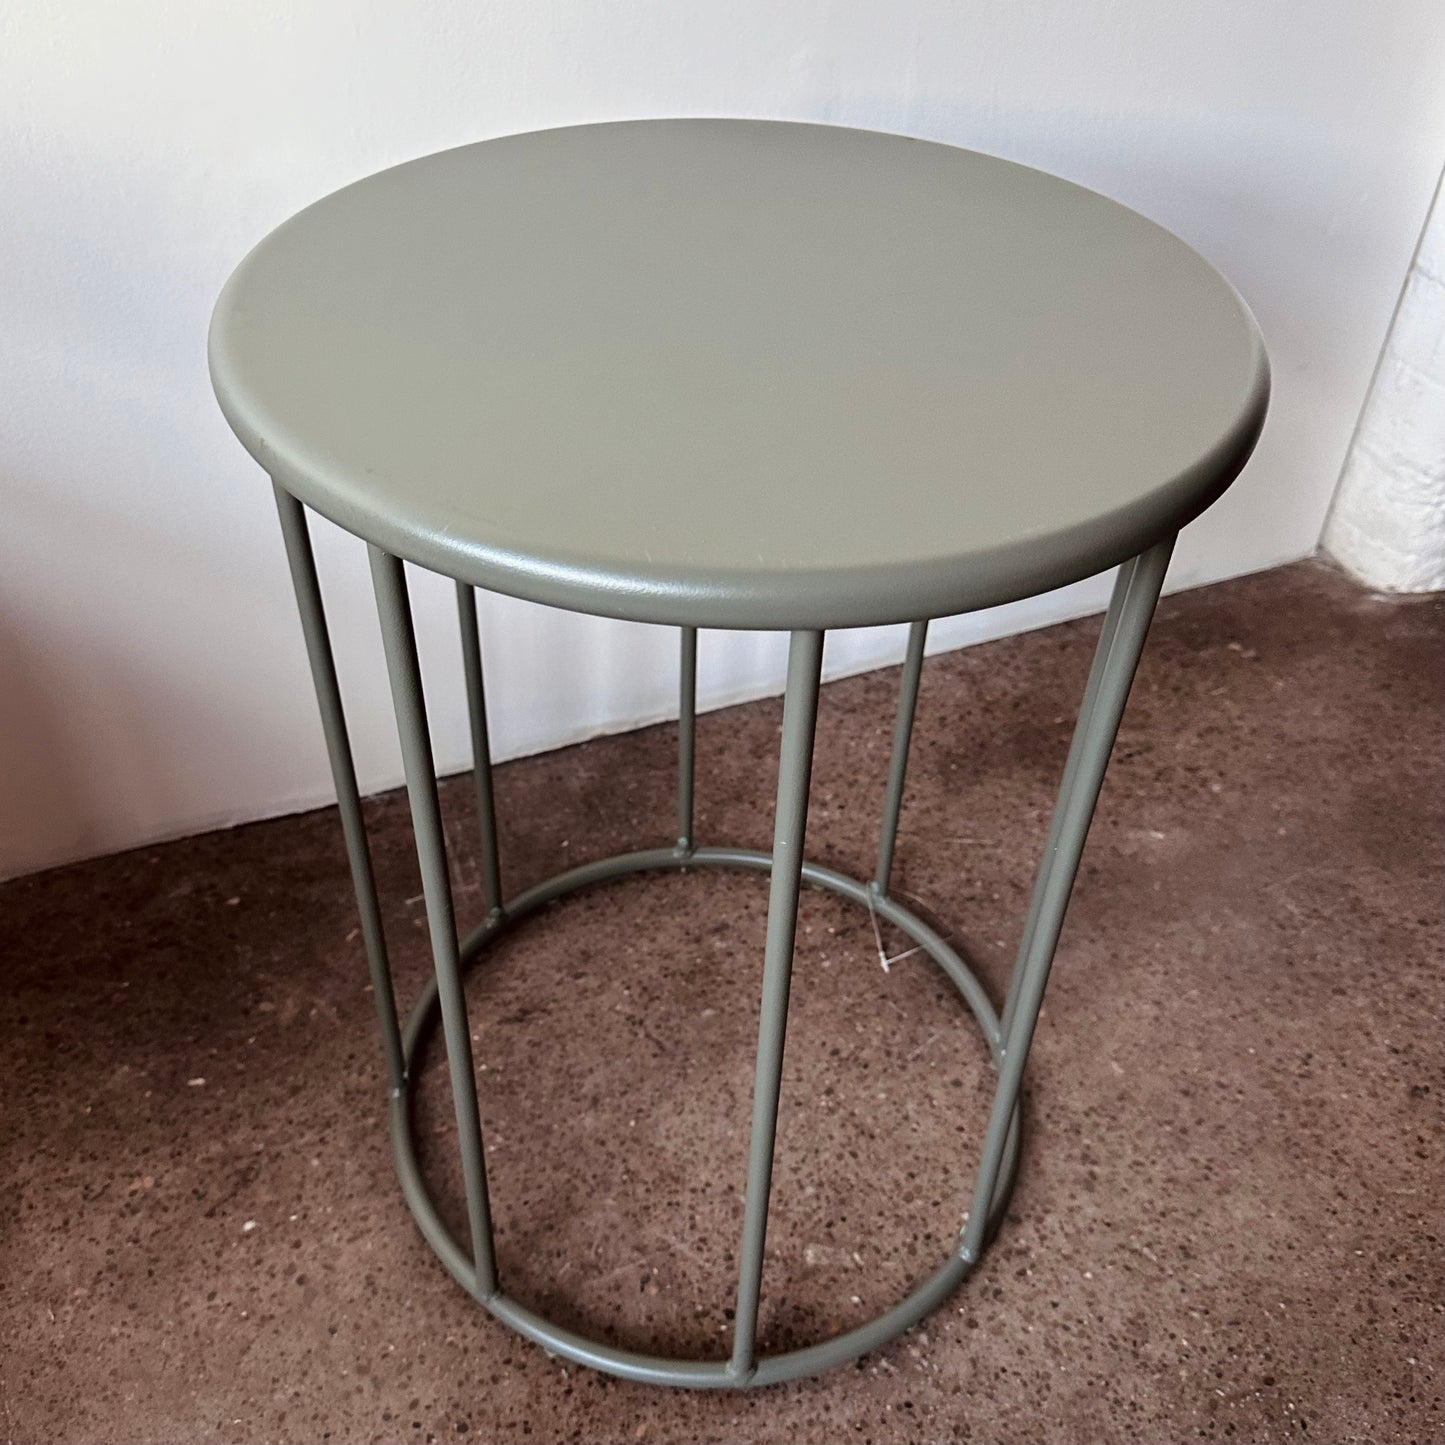 MOSS GREEN POWDER COATED METAL ROUND DRINK TABLE